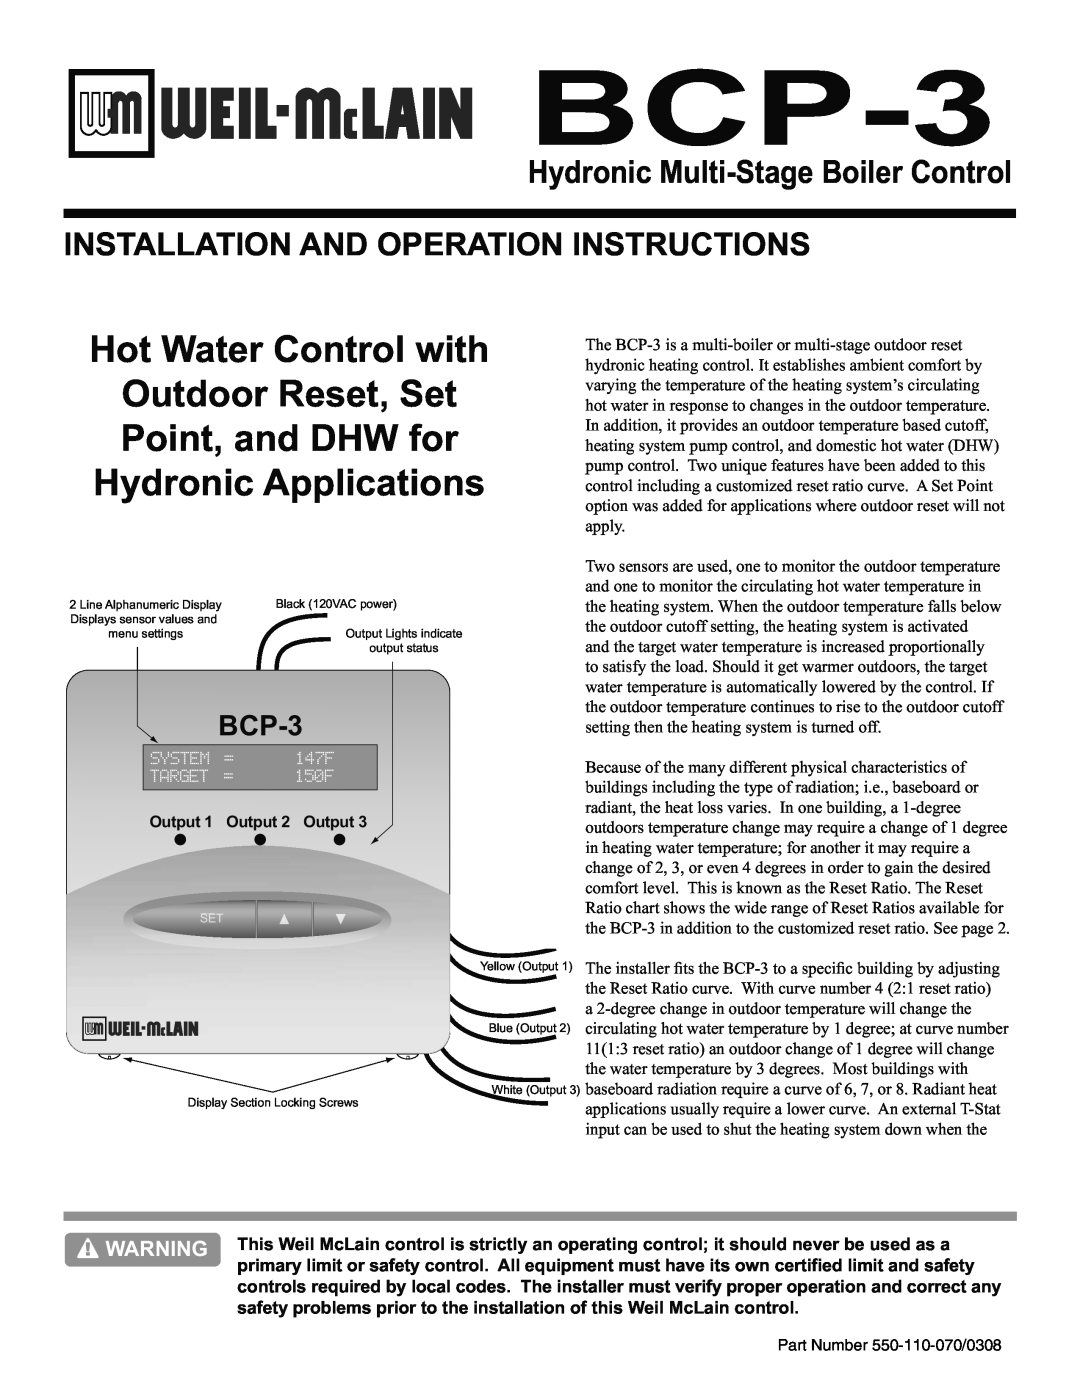 Weil-McLain BCP-3 manual Hydronic Multi-StageBoiler Control, Installation And Operation Instructions 